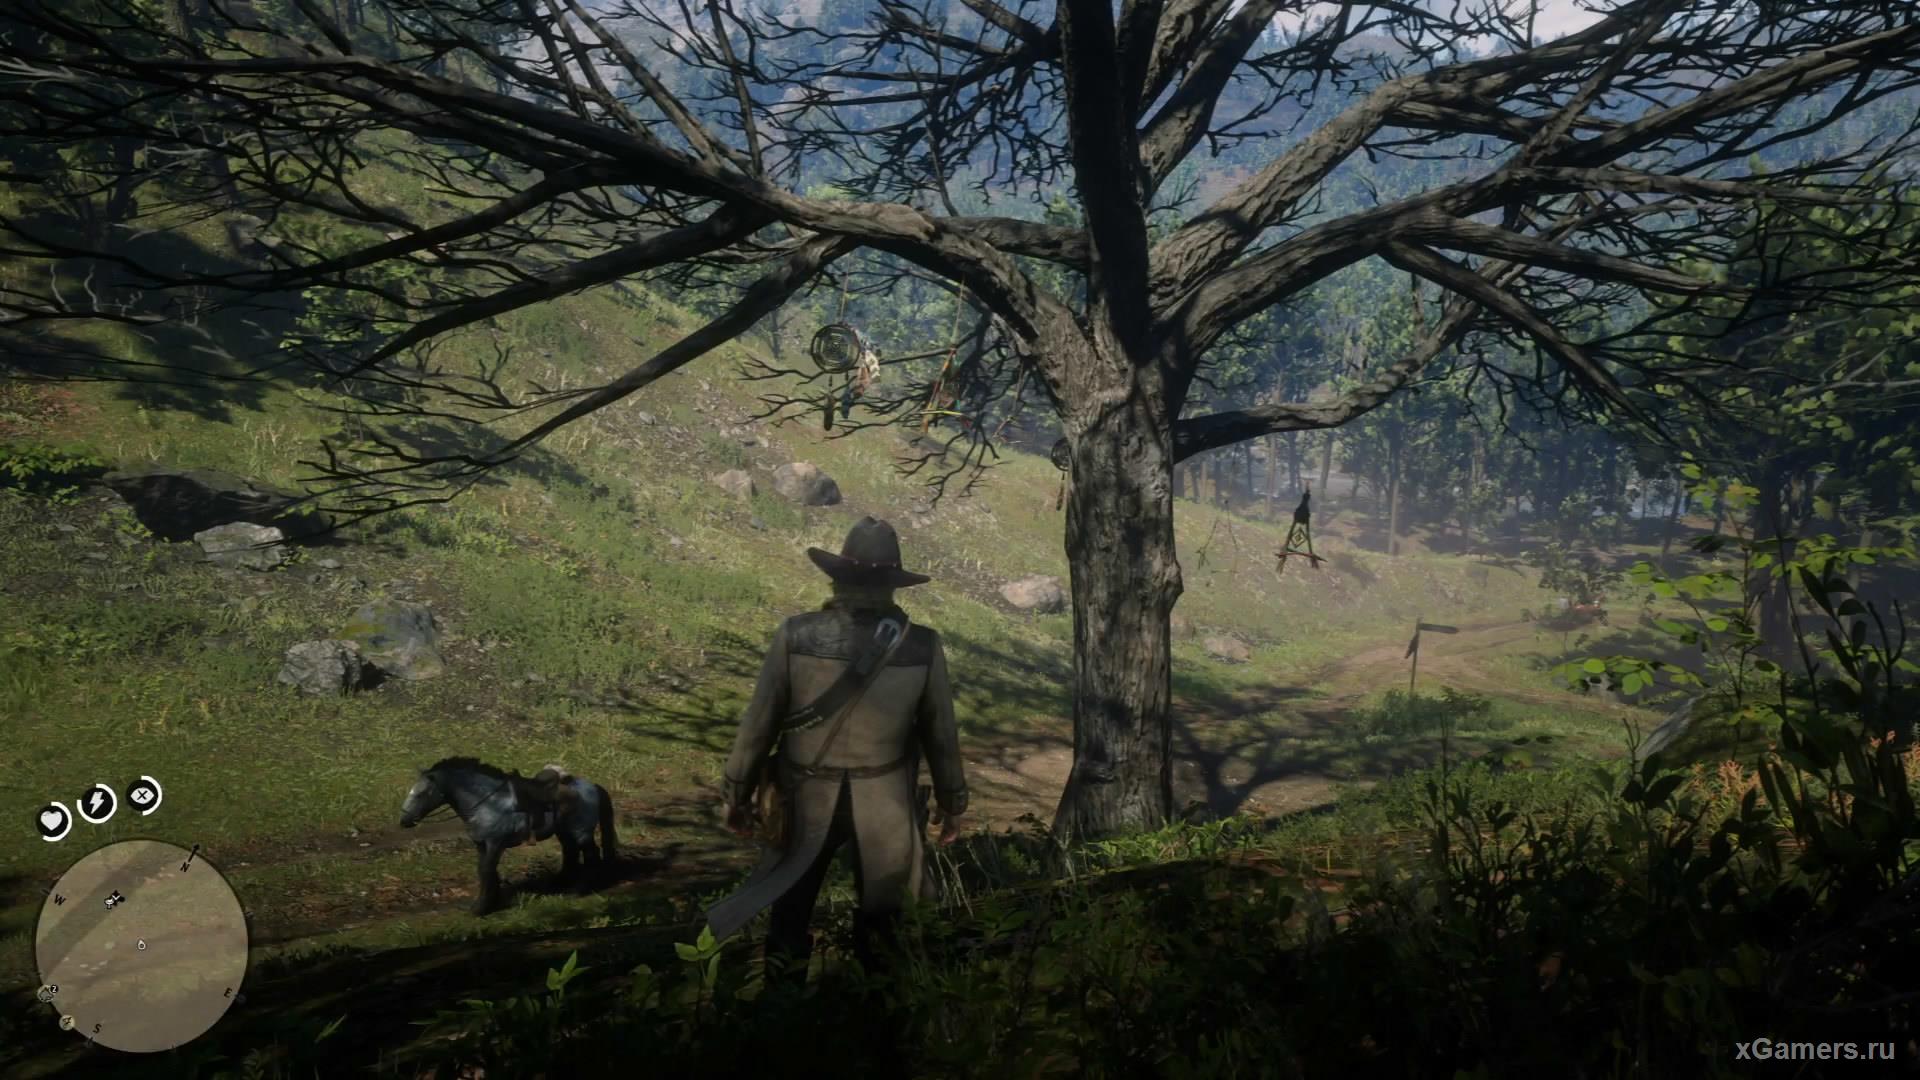 For the fifth one, you must again go north to Annesburg itself.